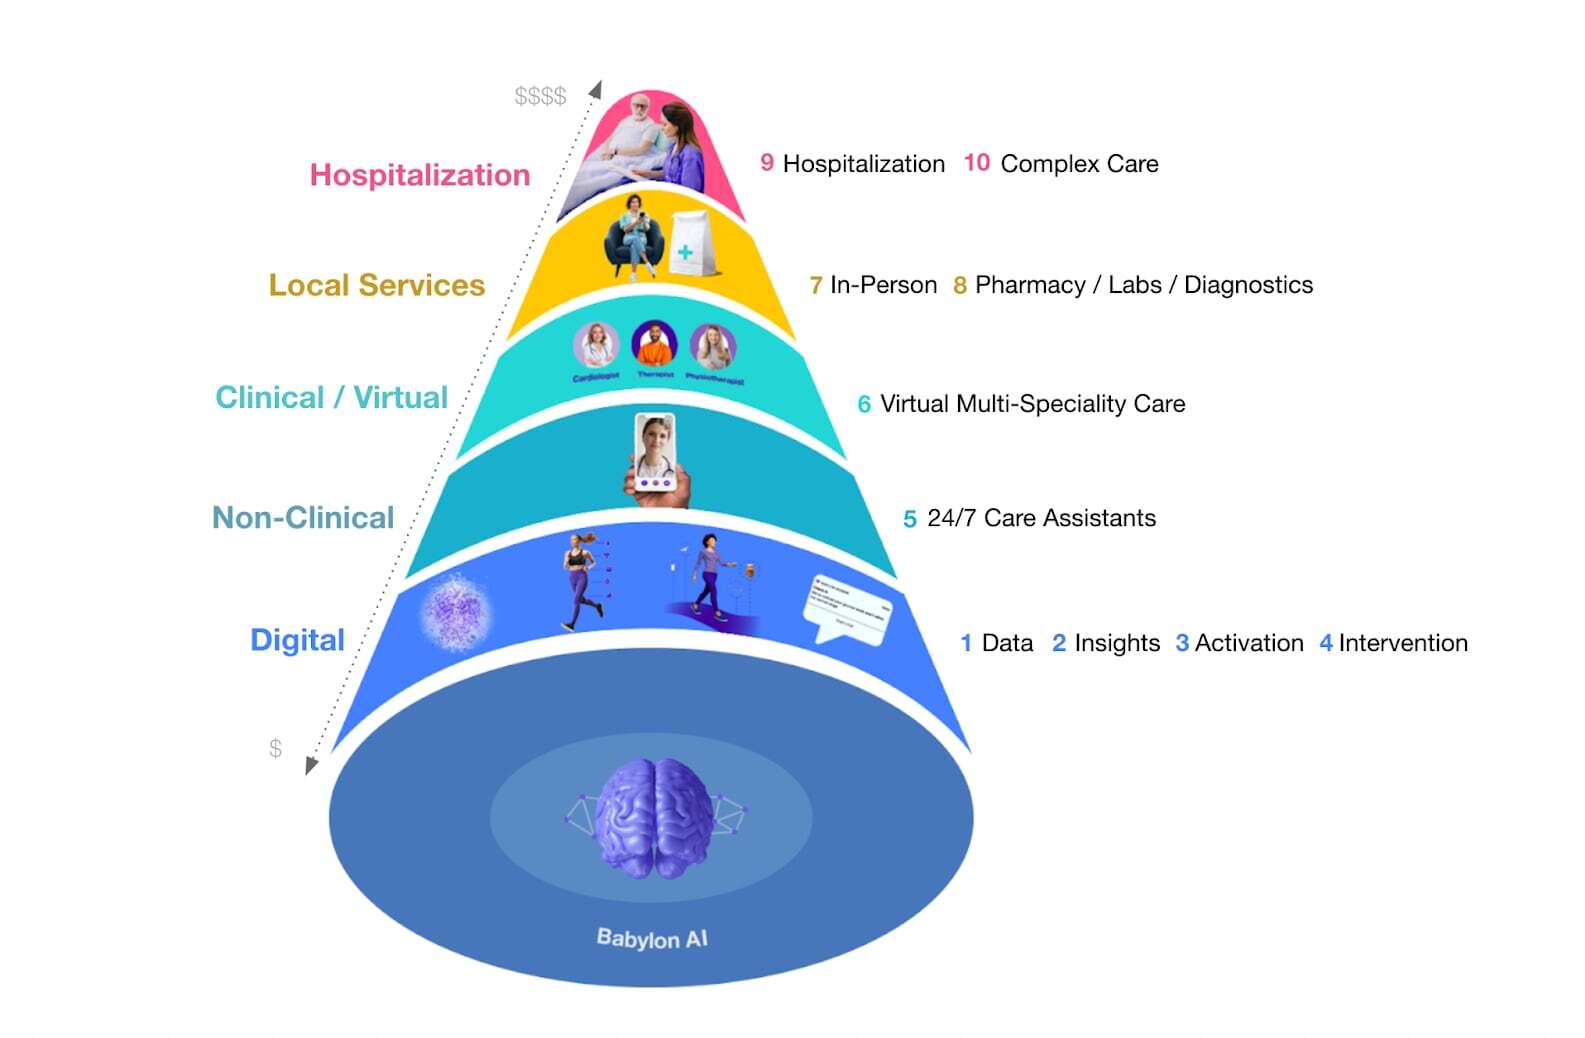 Babylon's pyramid of care showing an omni-channel mix of Digital, Non-Clinical, Clinical/Virtual, Local Services and Hospitalization capabilities, all powered by Babylon's proprietary AI